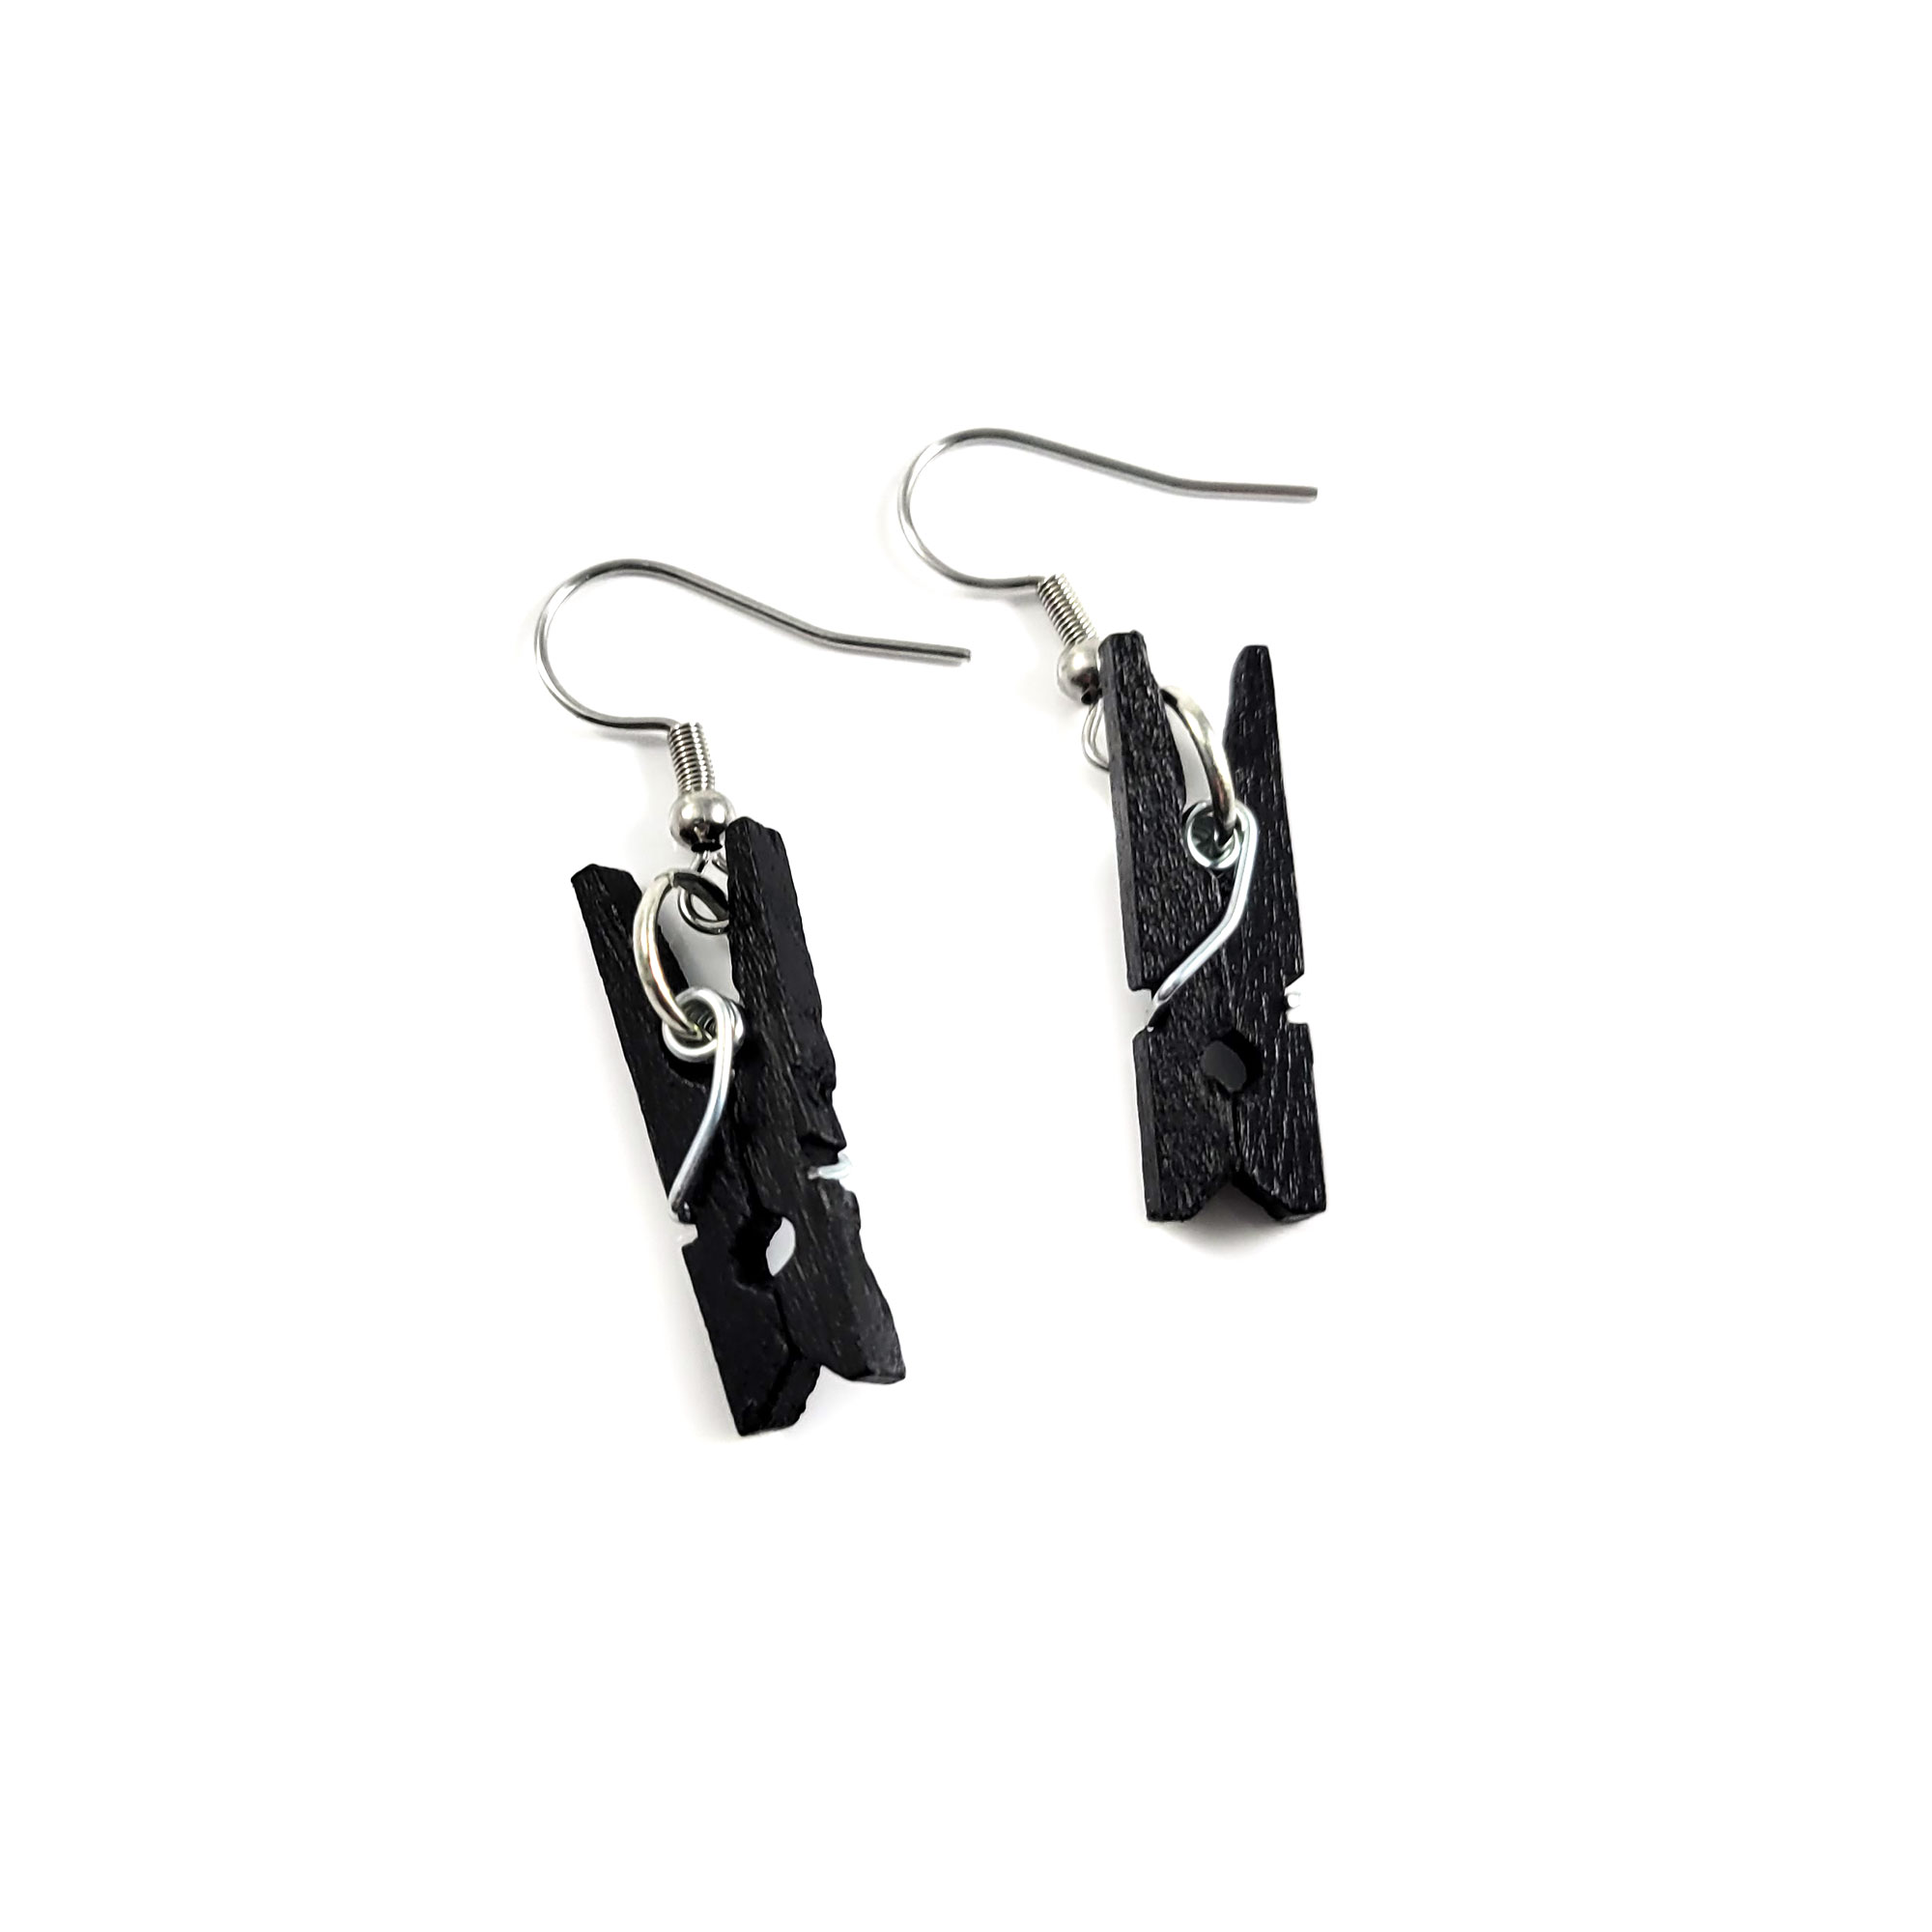 Pain & Pleasure Clothes Pin Earrings by Wilde Designs